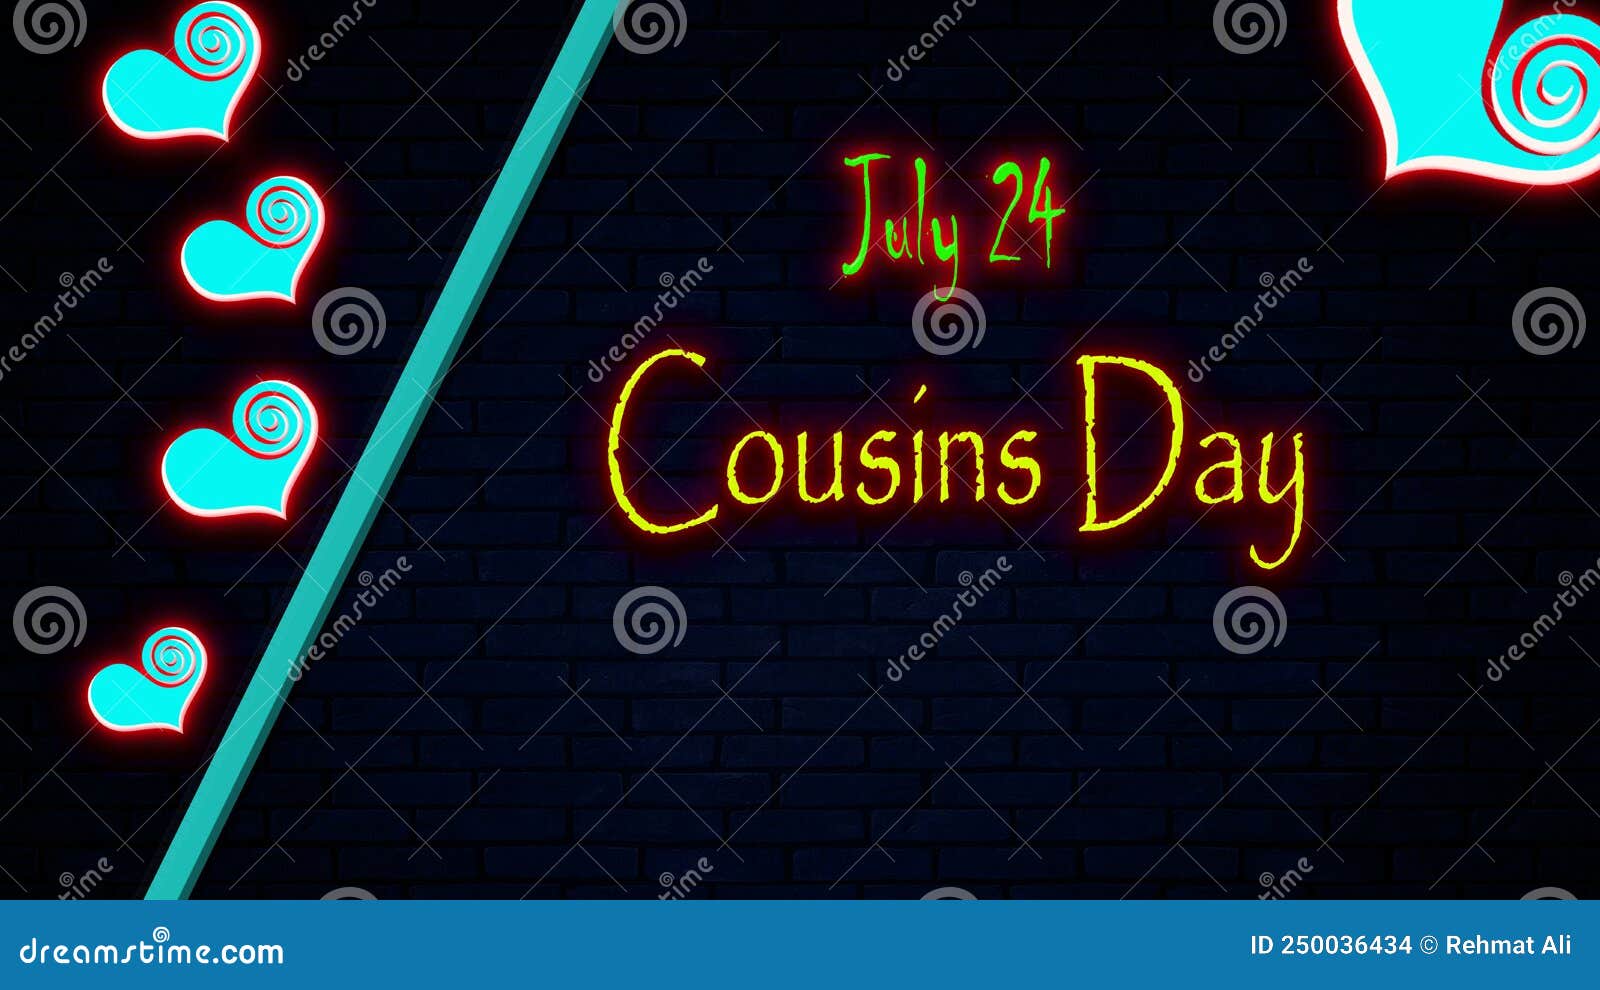 Happy Cousins Day, July 24. Calendar of July Month on Workplace ...